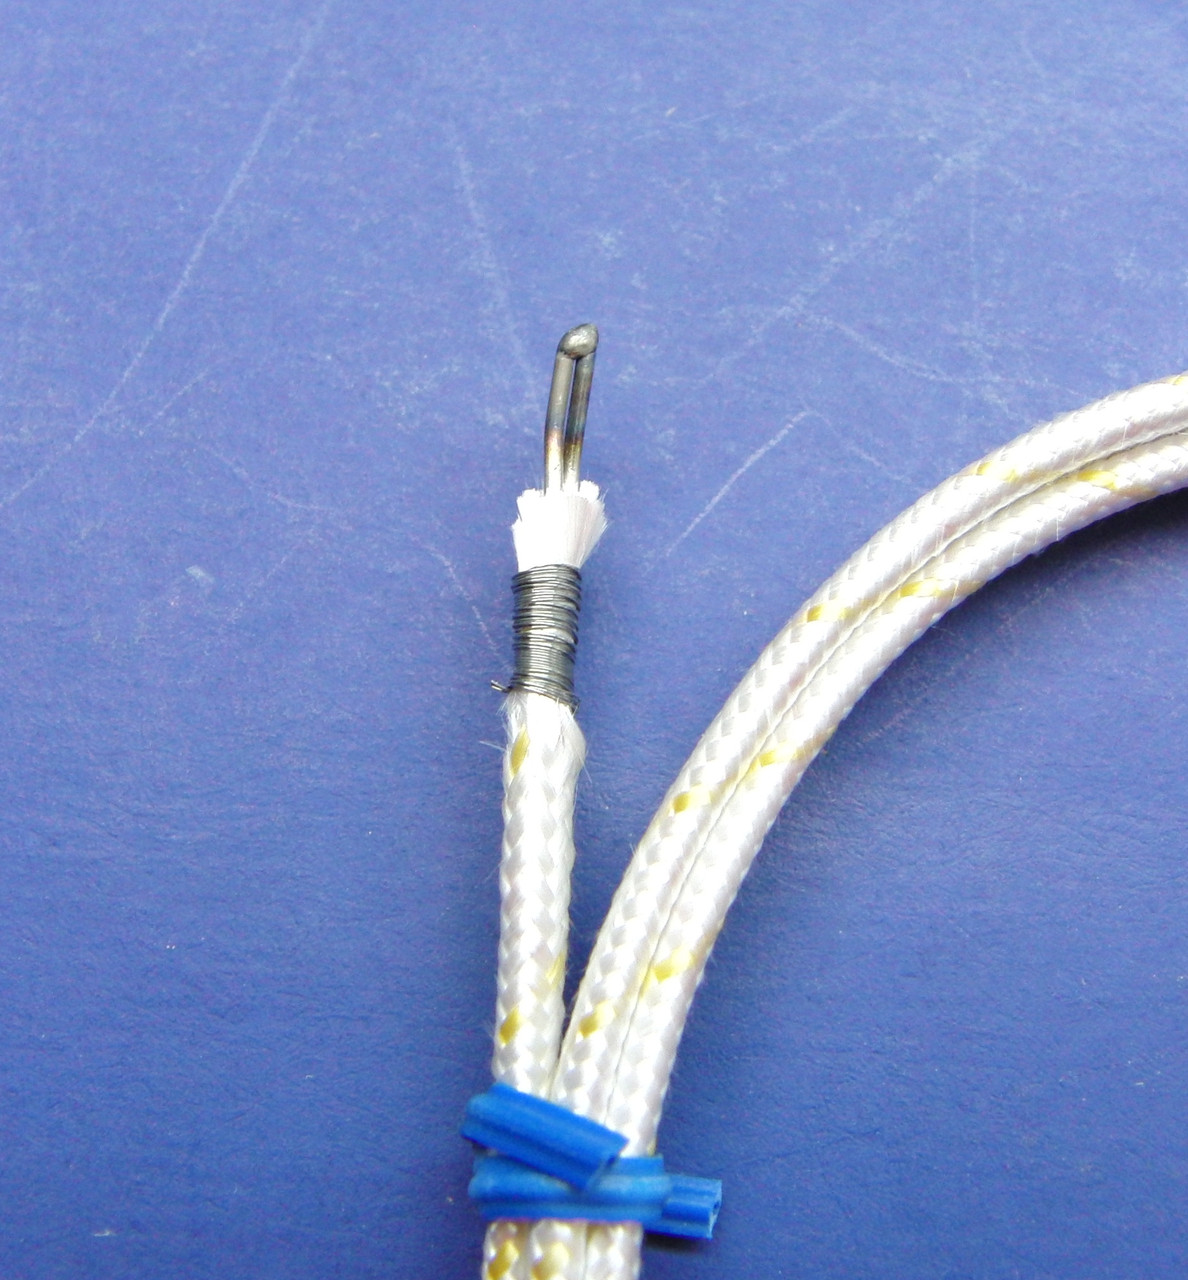 Buy a high temperature K-type thermocouple PK-1000 in 5 ft length